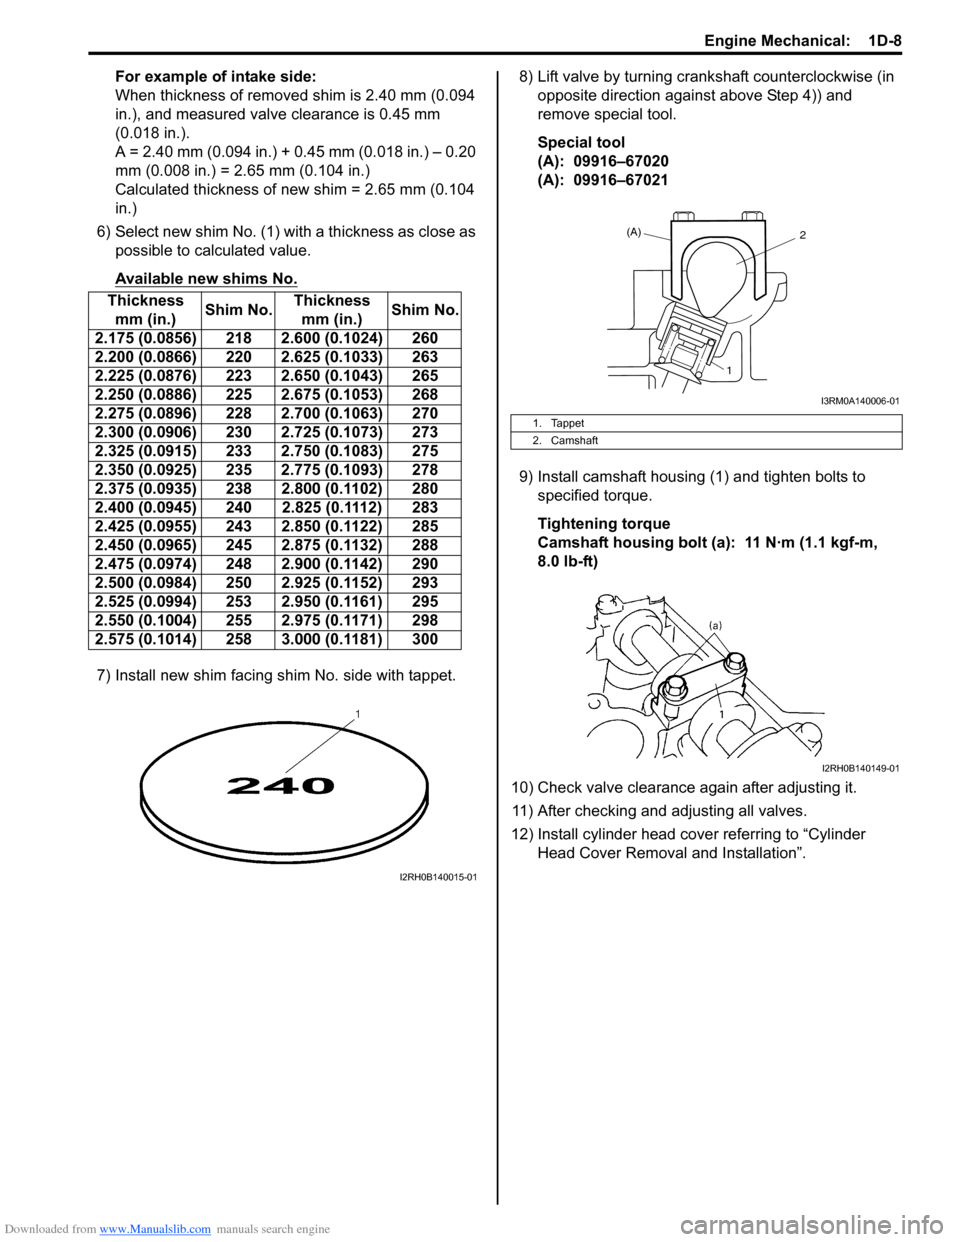 SUZUKI SWIFT 2008 2.G Service User Guide Downloaded from www.Manualslib.com manuals search engine Engine Mechanical:  1D-8
For example of intake side:
When thickness of removed shim is 2.40 mm (0.094 
in.), and measured valve clearance is 0.